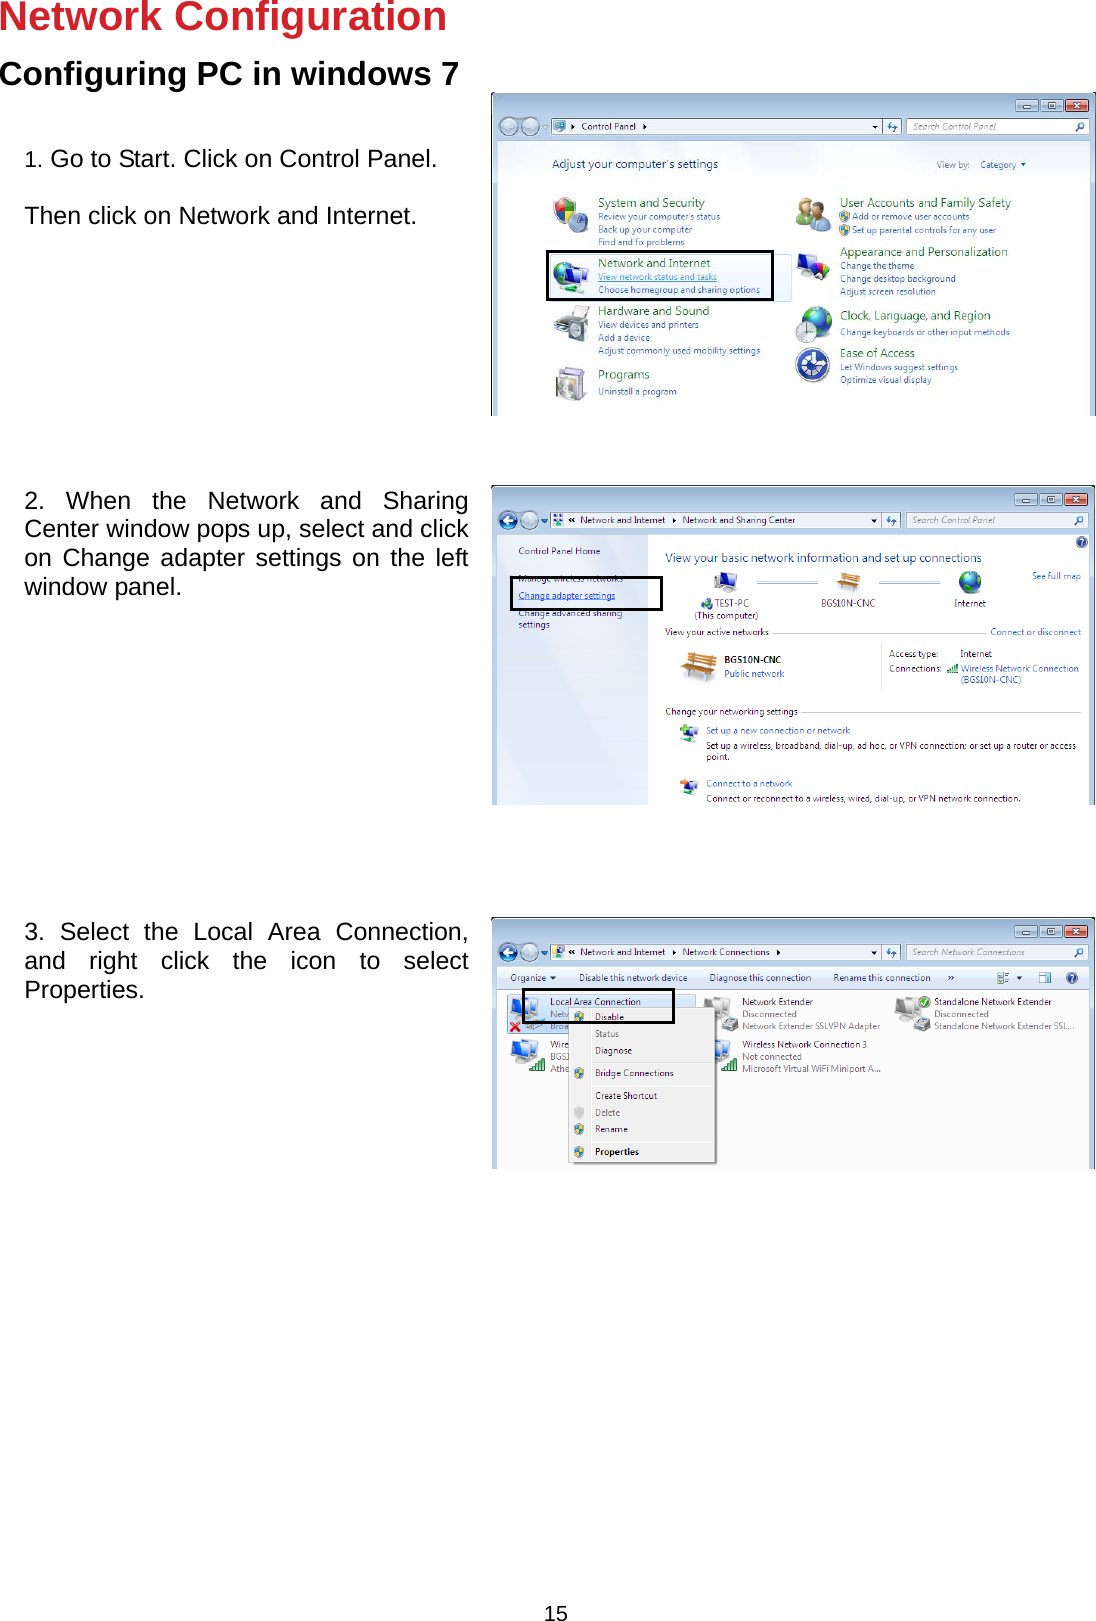  15 Network Configuration  Configuring PC in windows 7   1. Go to Start. Click on Control Panel.  Then click on Network and Internet. 2. When the Network and Sharing Center window pops up, select and click on Change adapter settings on the left window panel. 3. Select the Local Area Connection, and right click the icon to select Properties. 